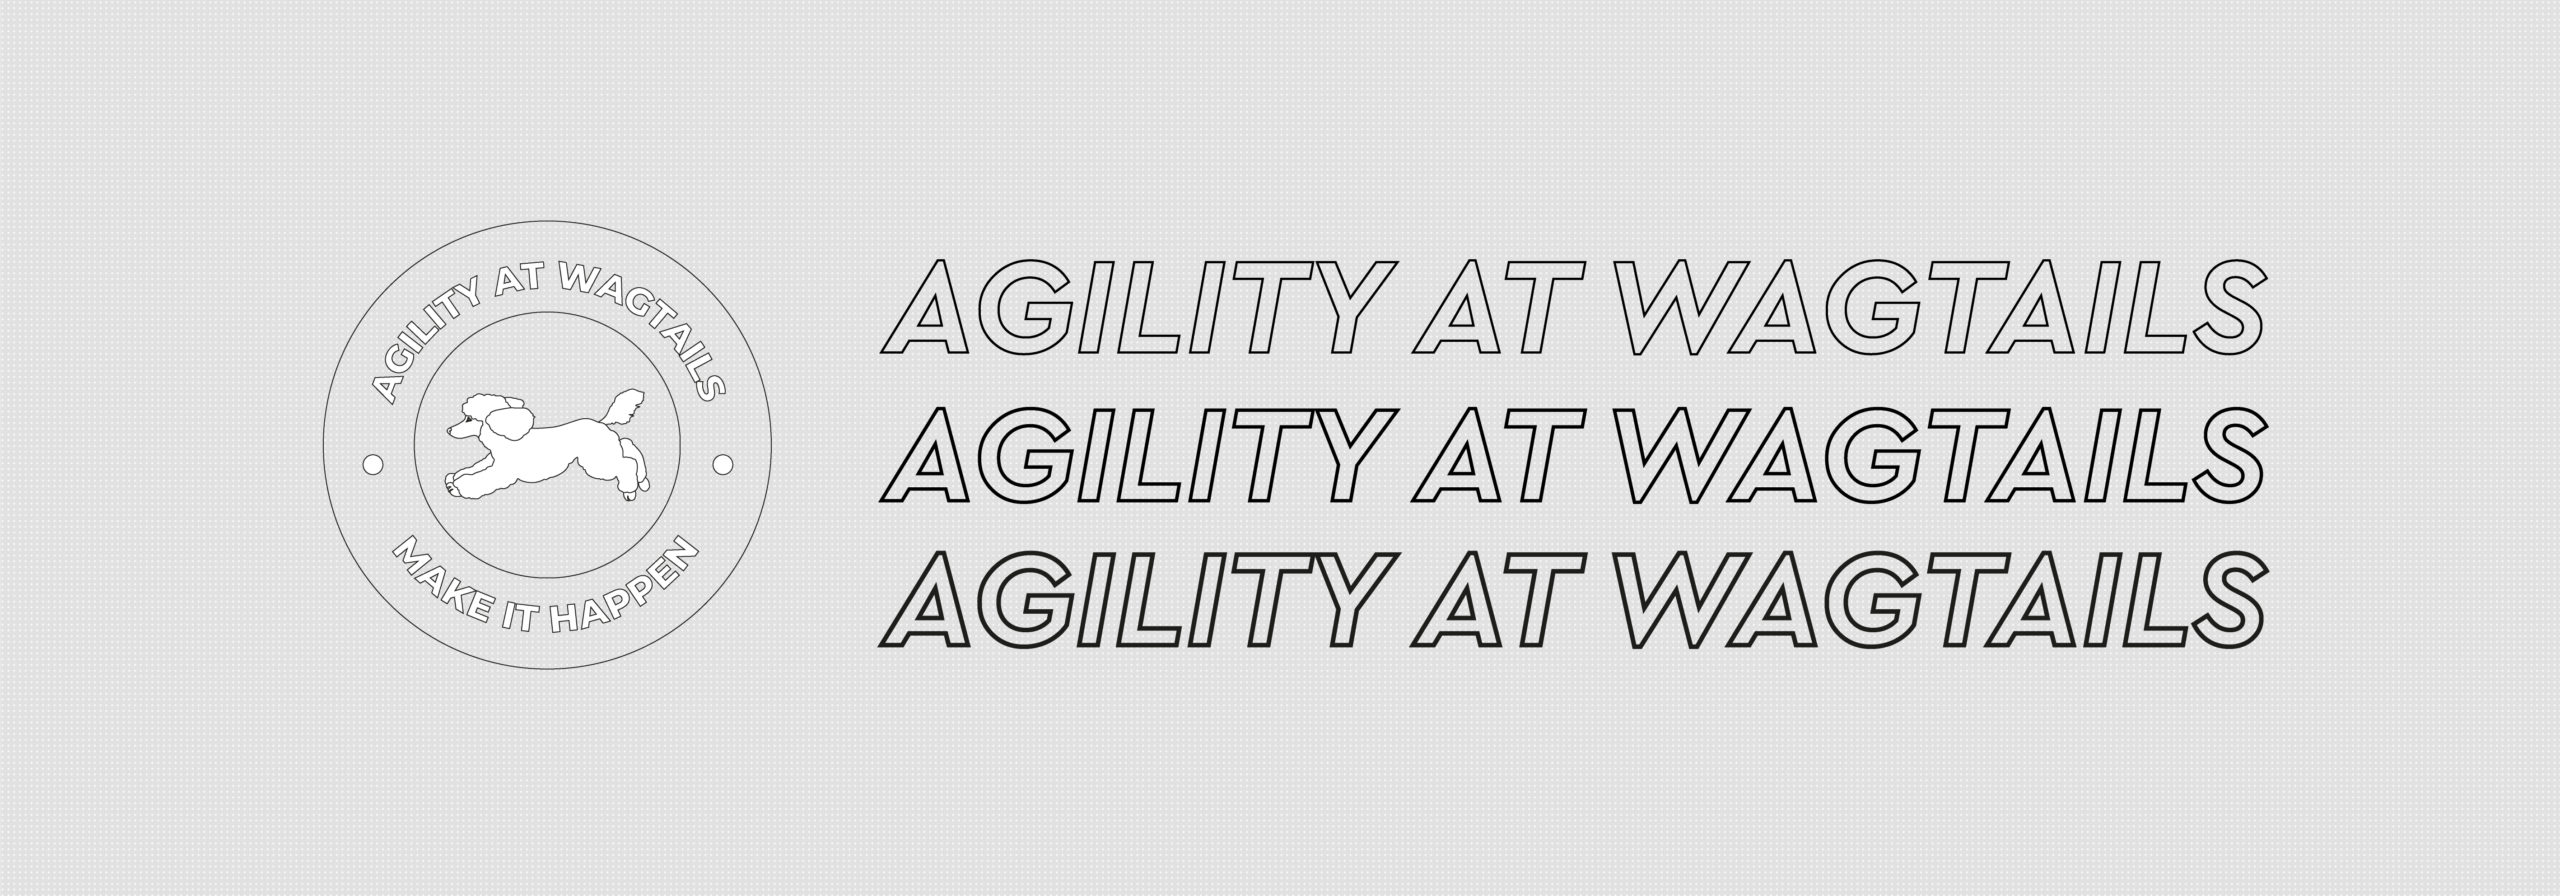 Agility at Wagtails